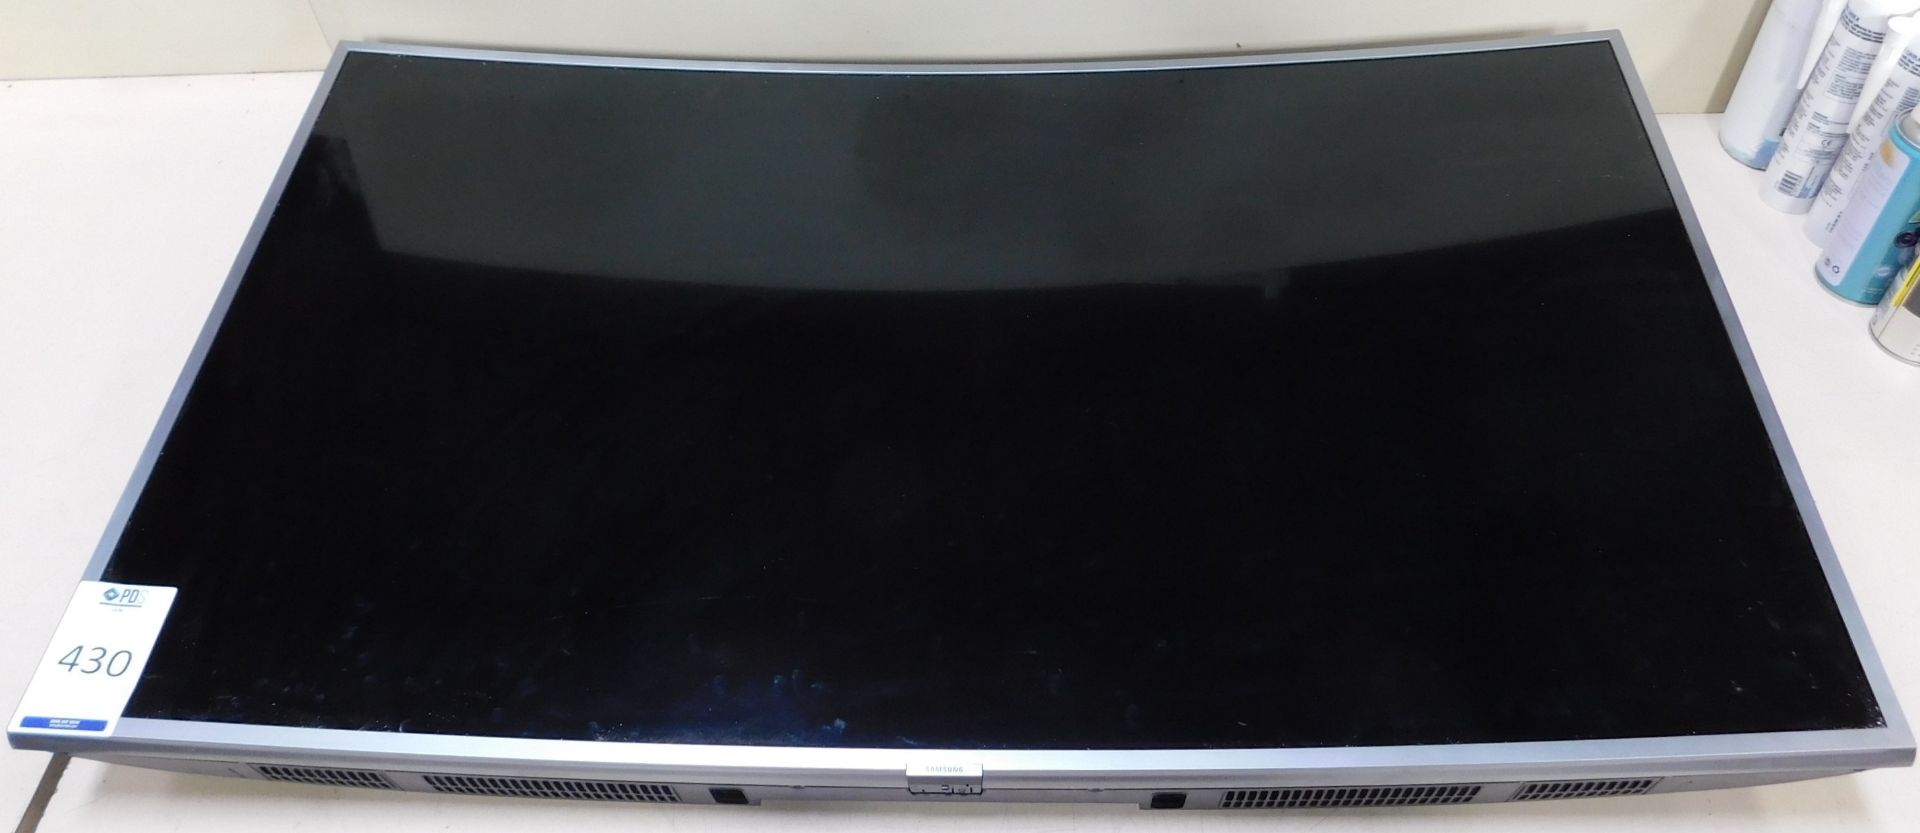 Samsung UE49NU767OU 49” Curved TV with No Remote (Located: Brentwood. Please Refer to General